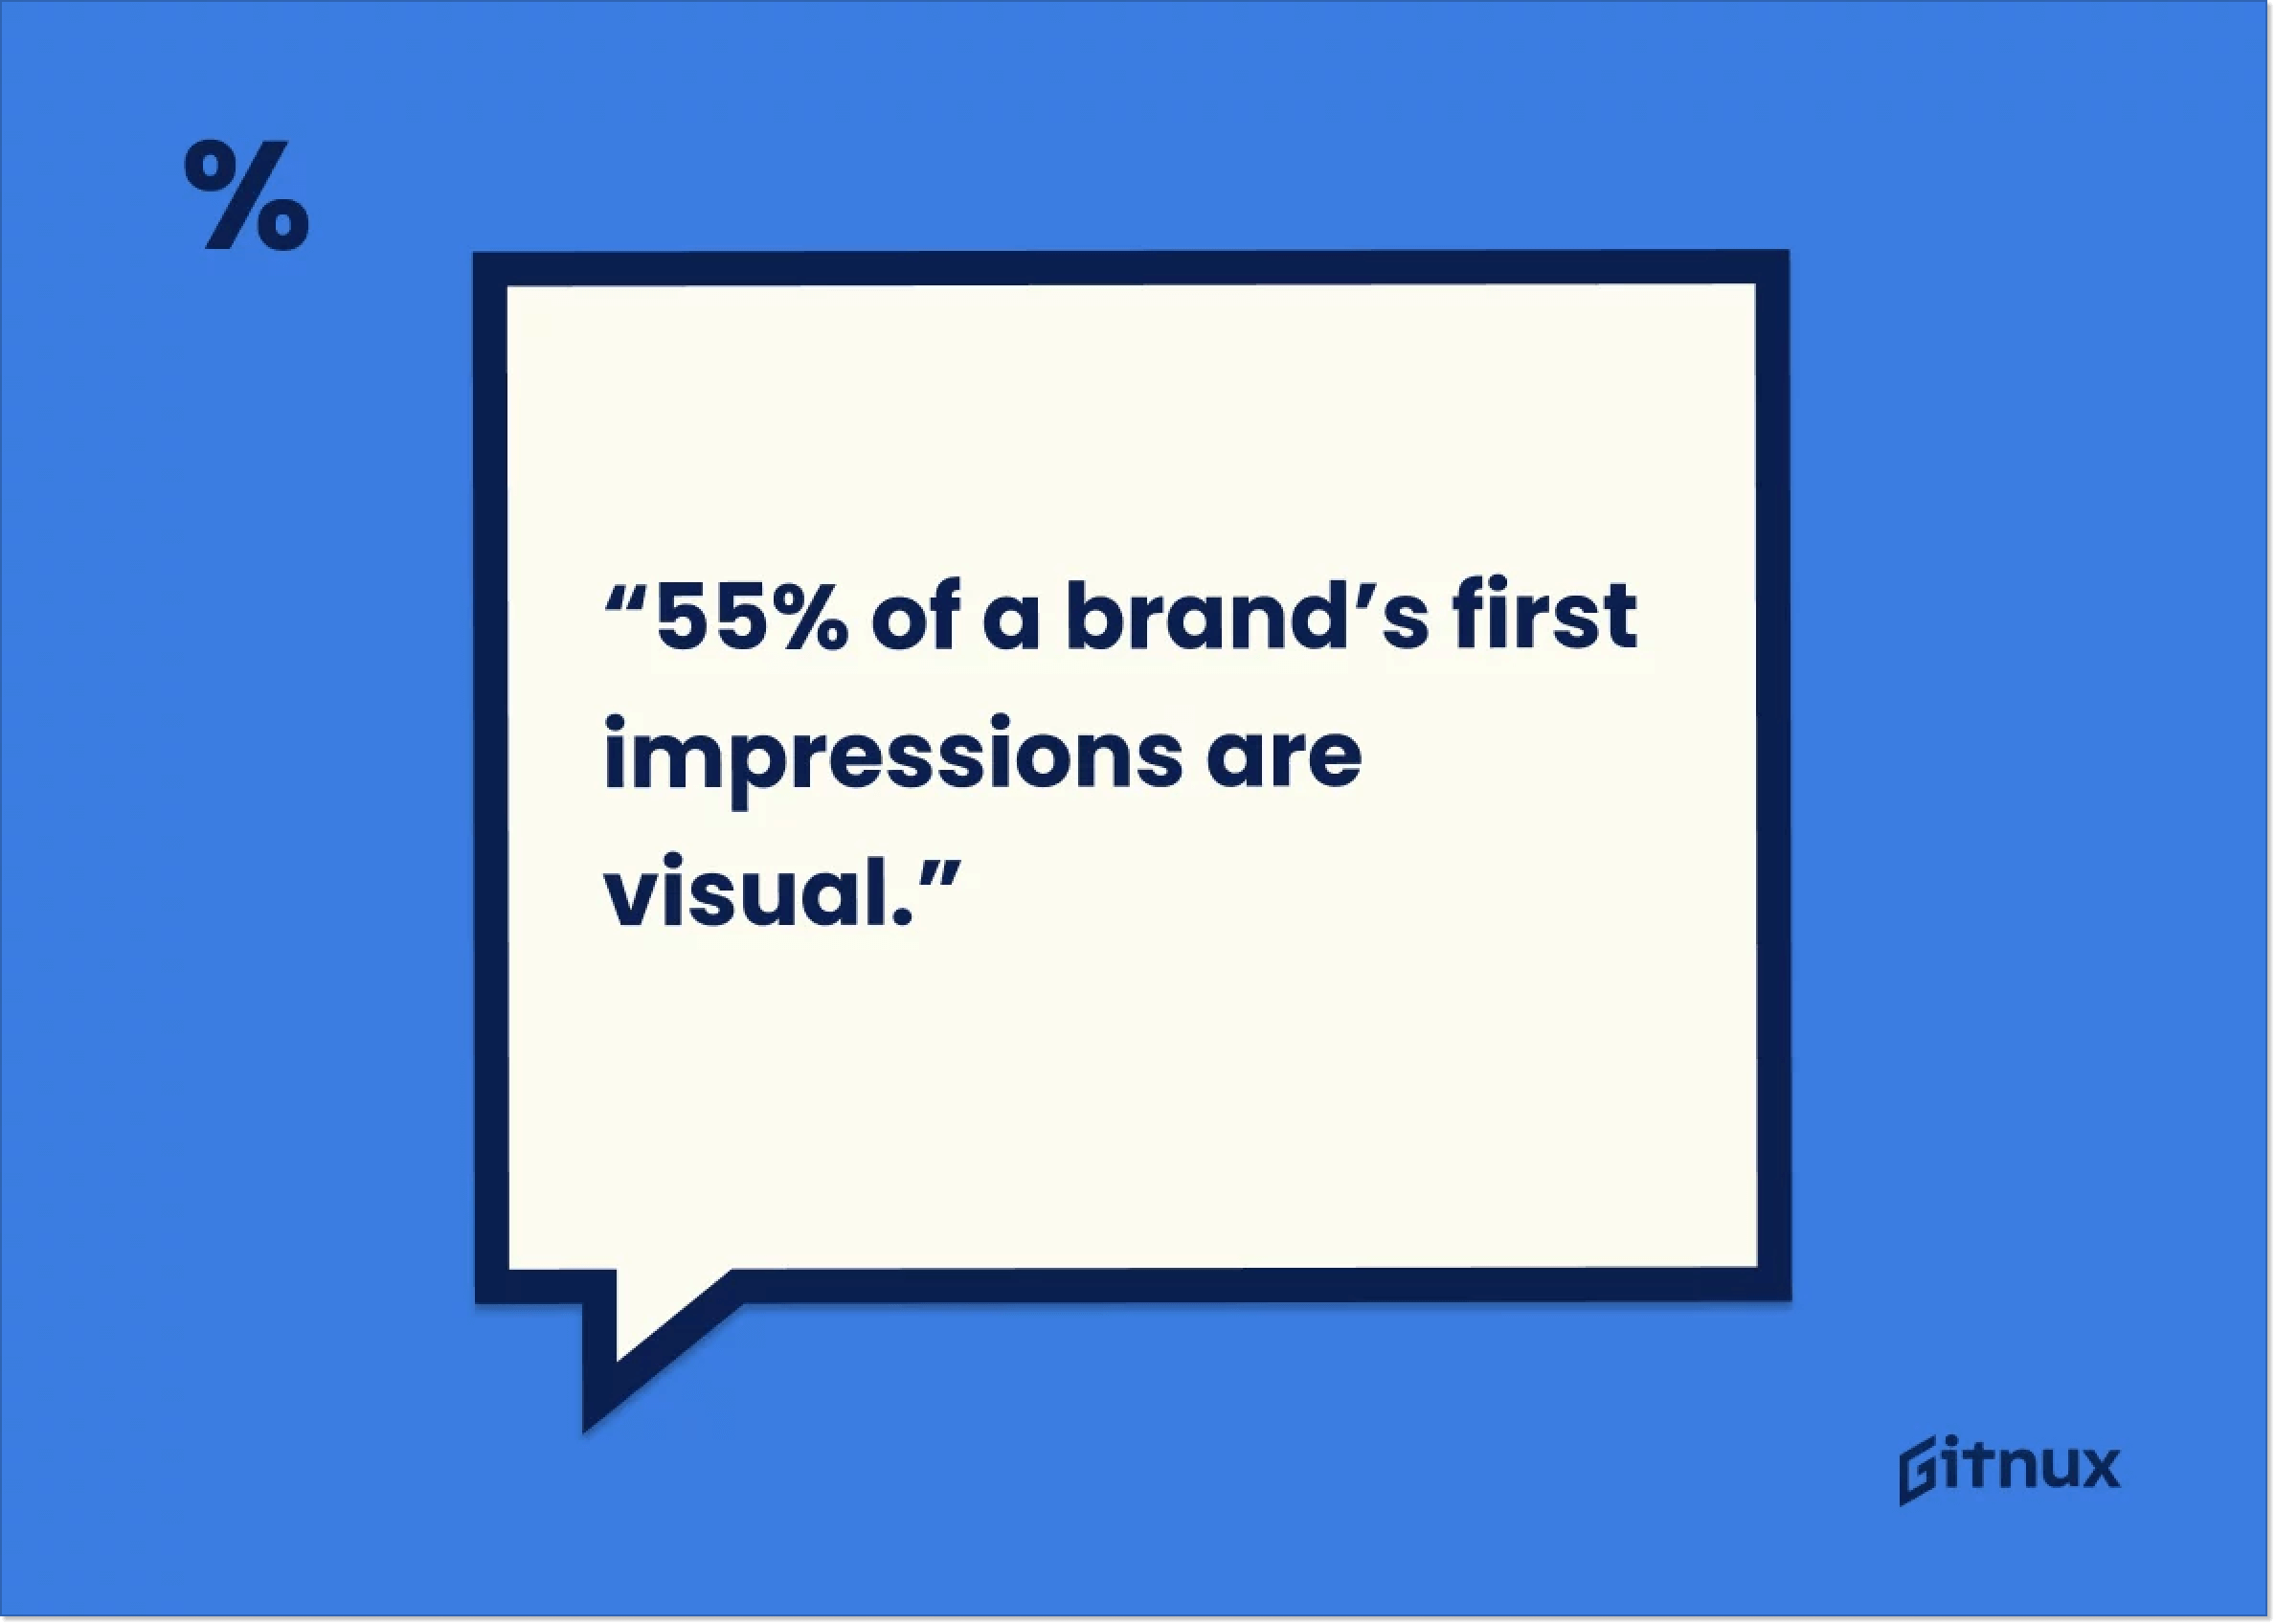 Graphic showing that 55% of a brand’s first impressions are visual.